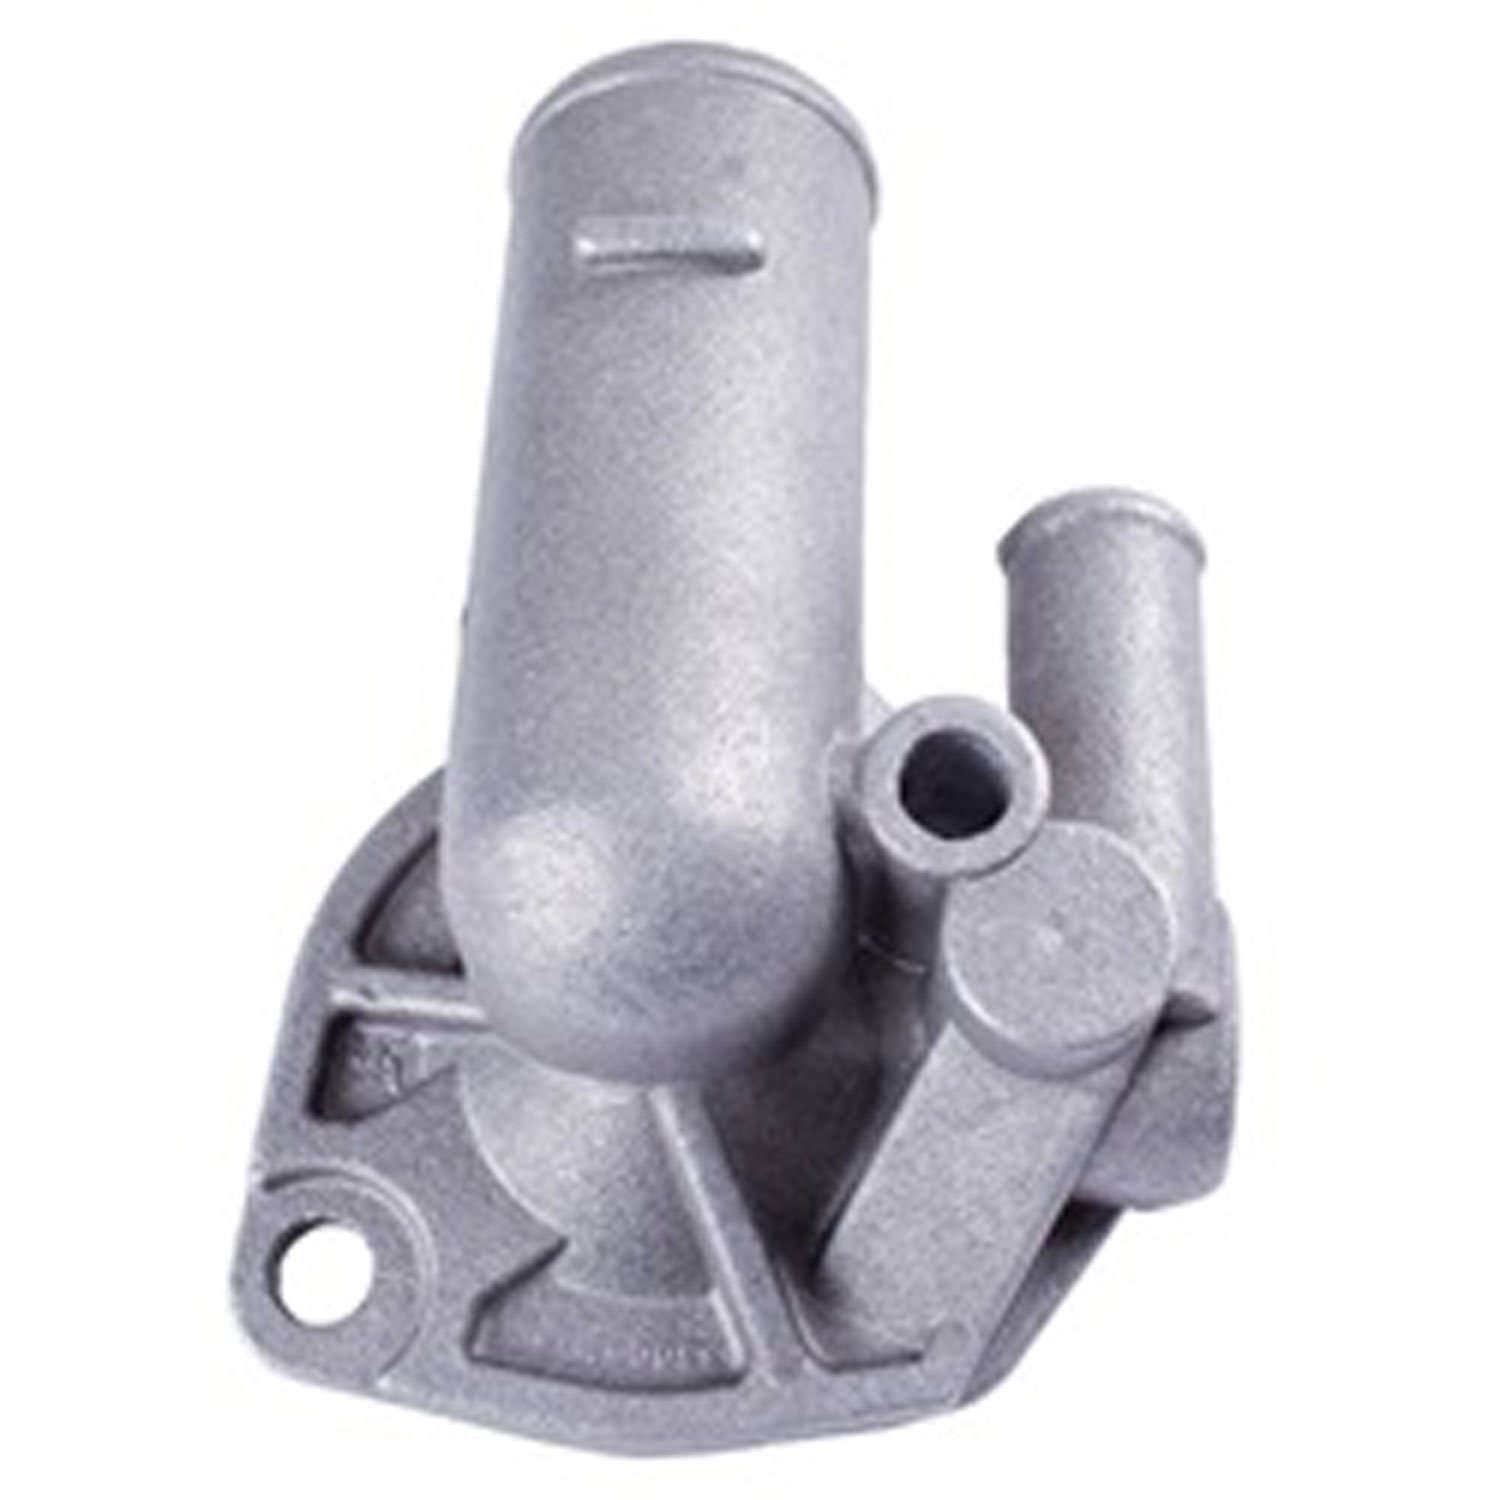 This thermostat housing from Omix-ADA fits 91-06 Jeep models with a 2.4L 2.5L or 4.0L engine.